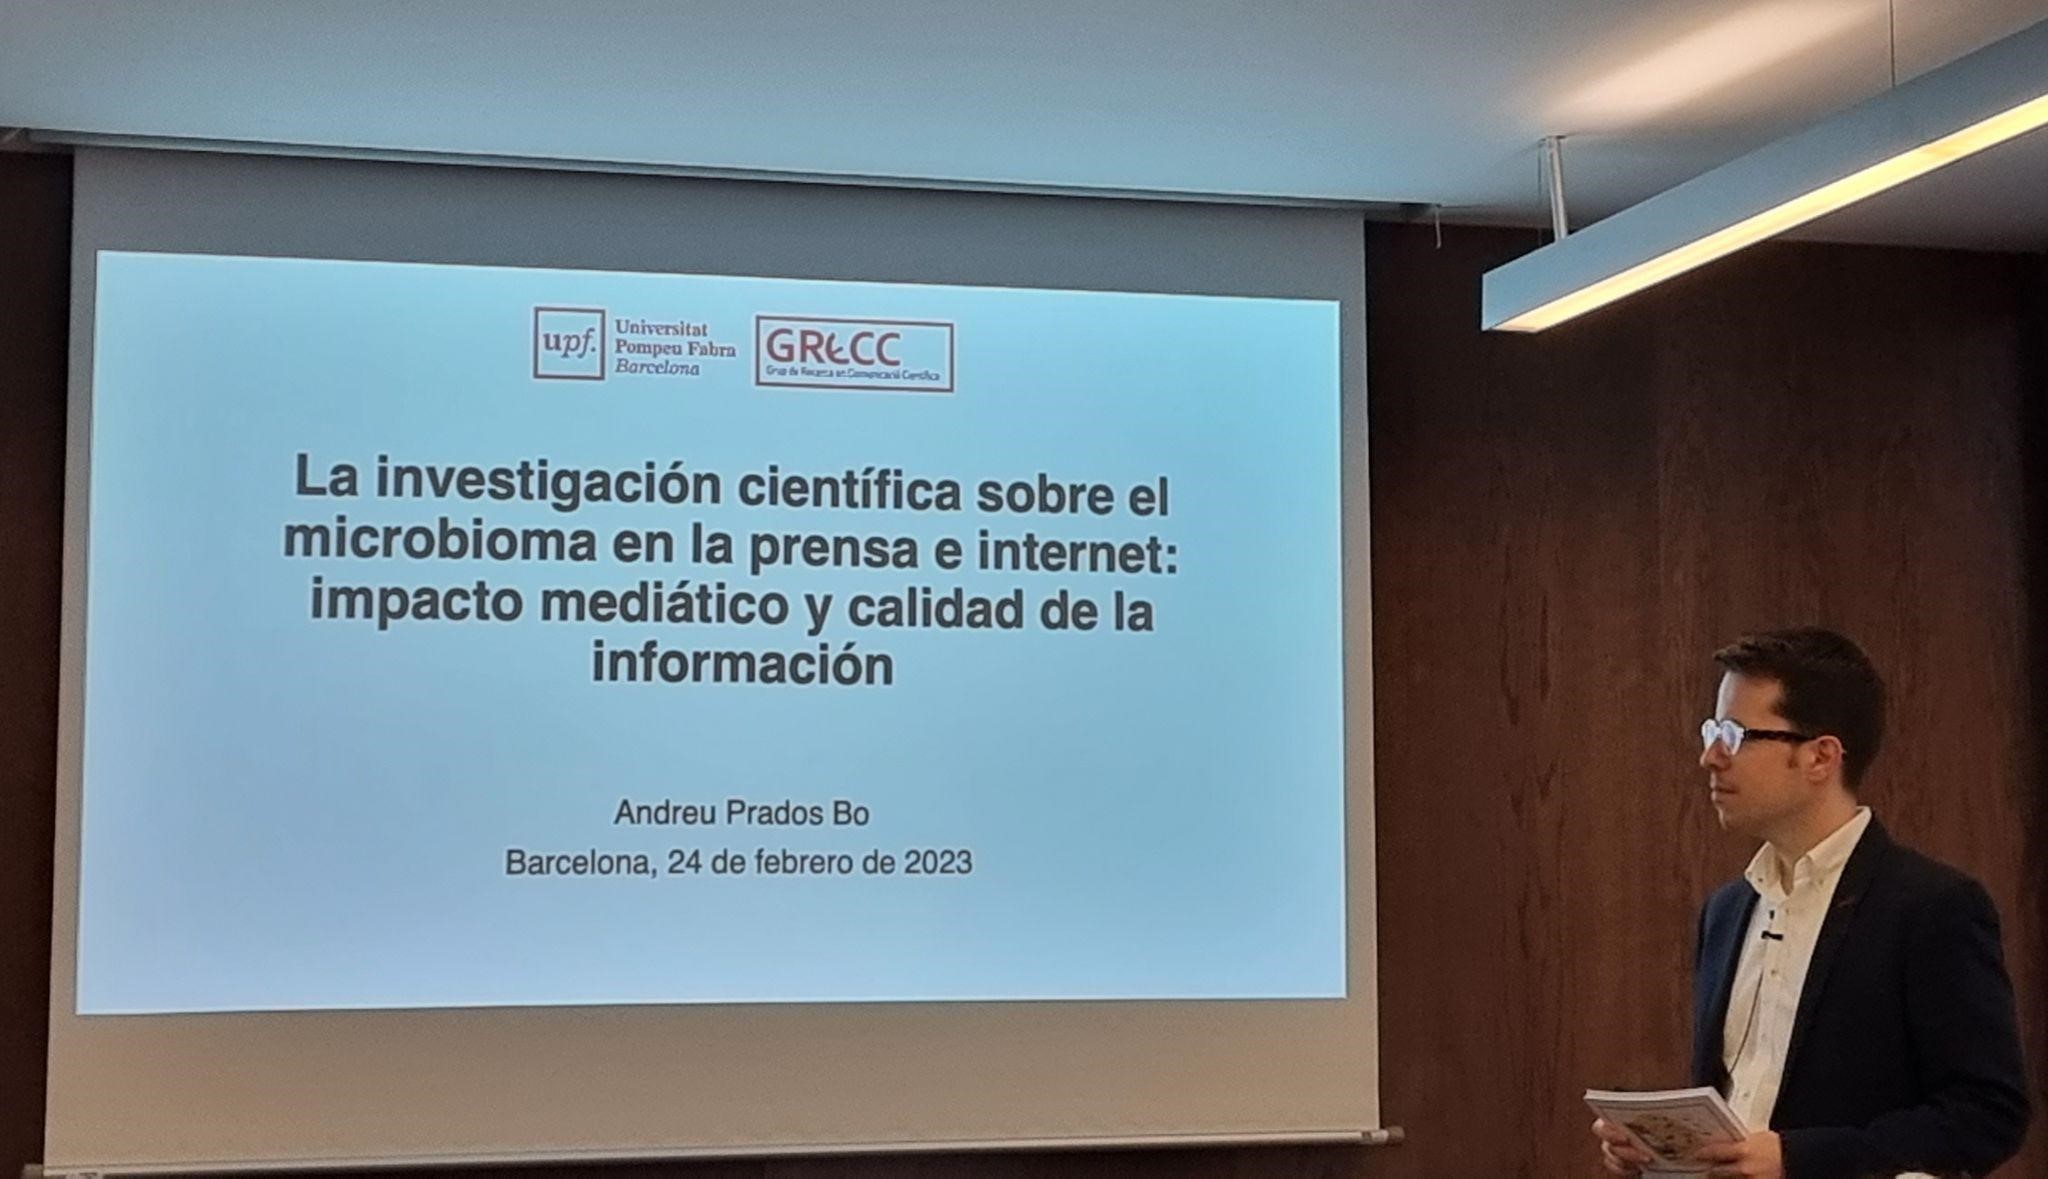 GRECC researcher, Andreu Prados, defended his doctoral thesis on the microbiome in the press and the internet